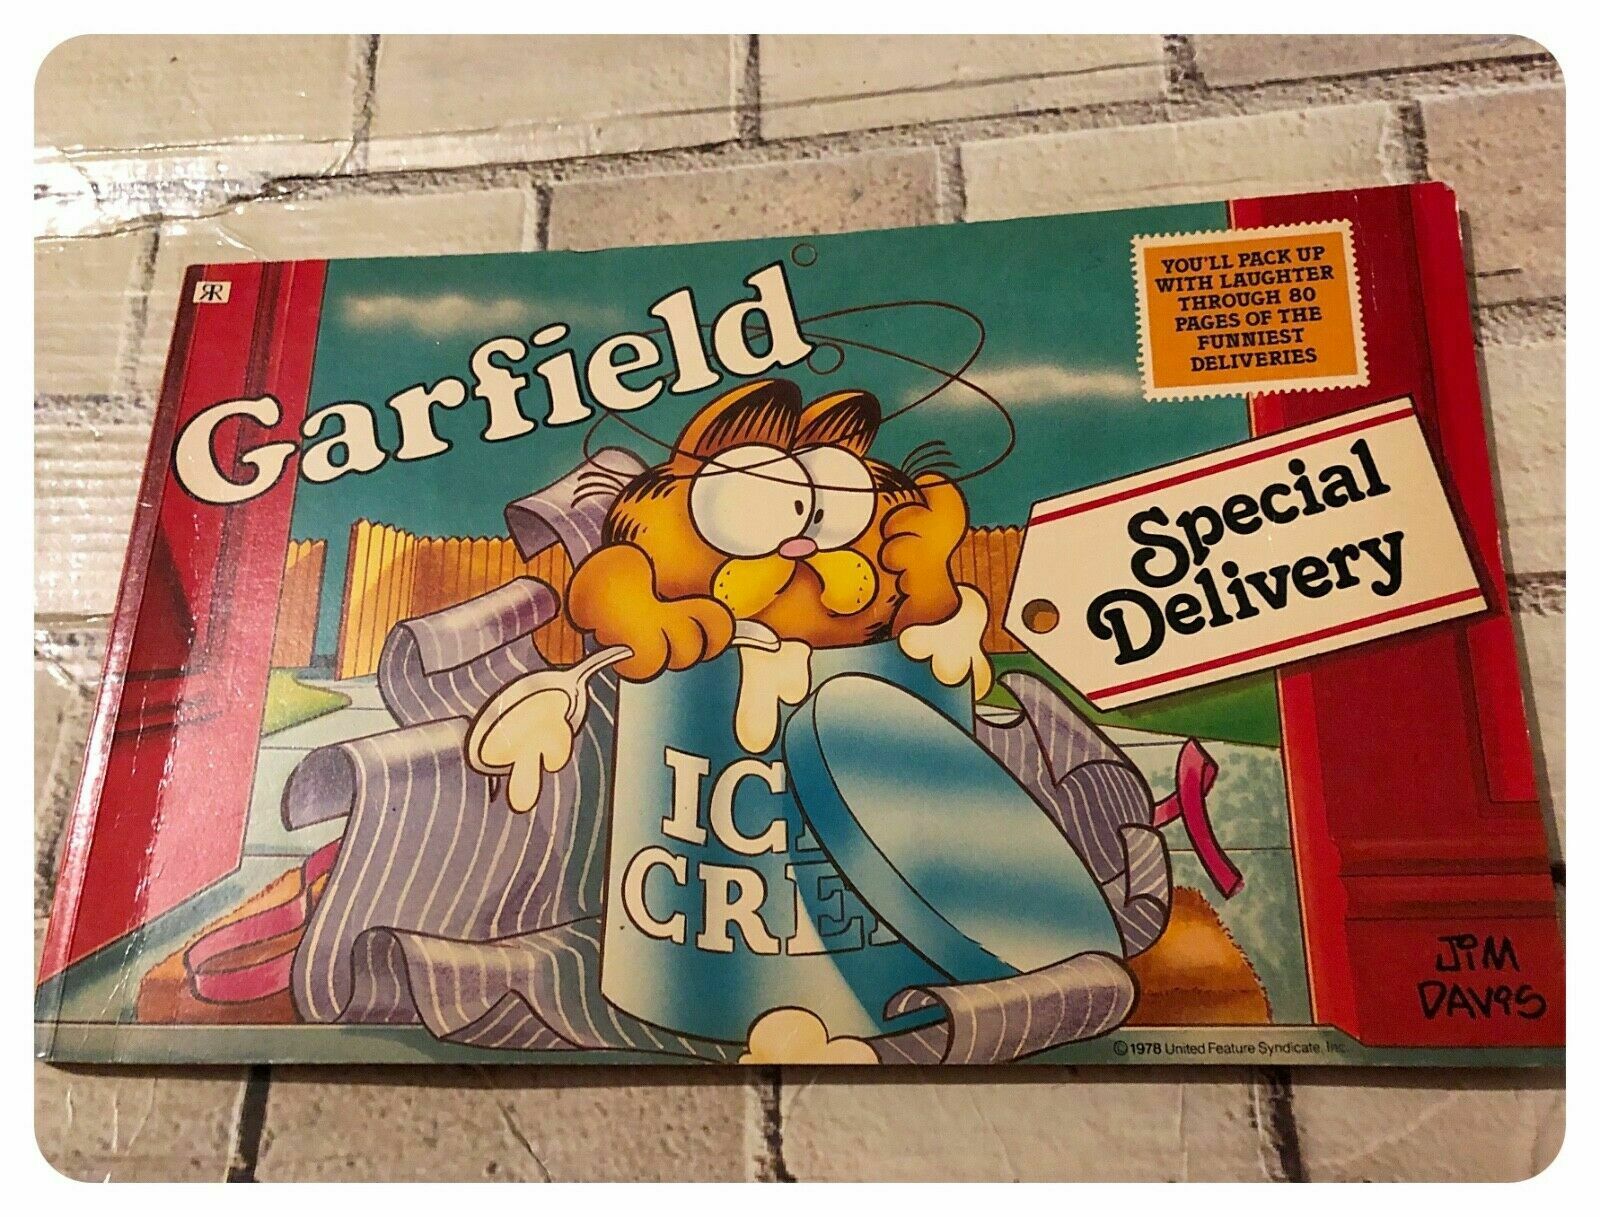 Garfield-Special Delivery by Jim Davis (Paperback, 1986)